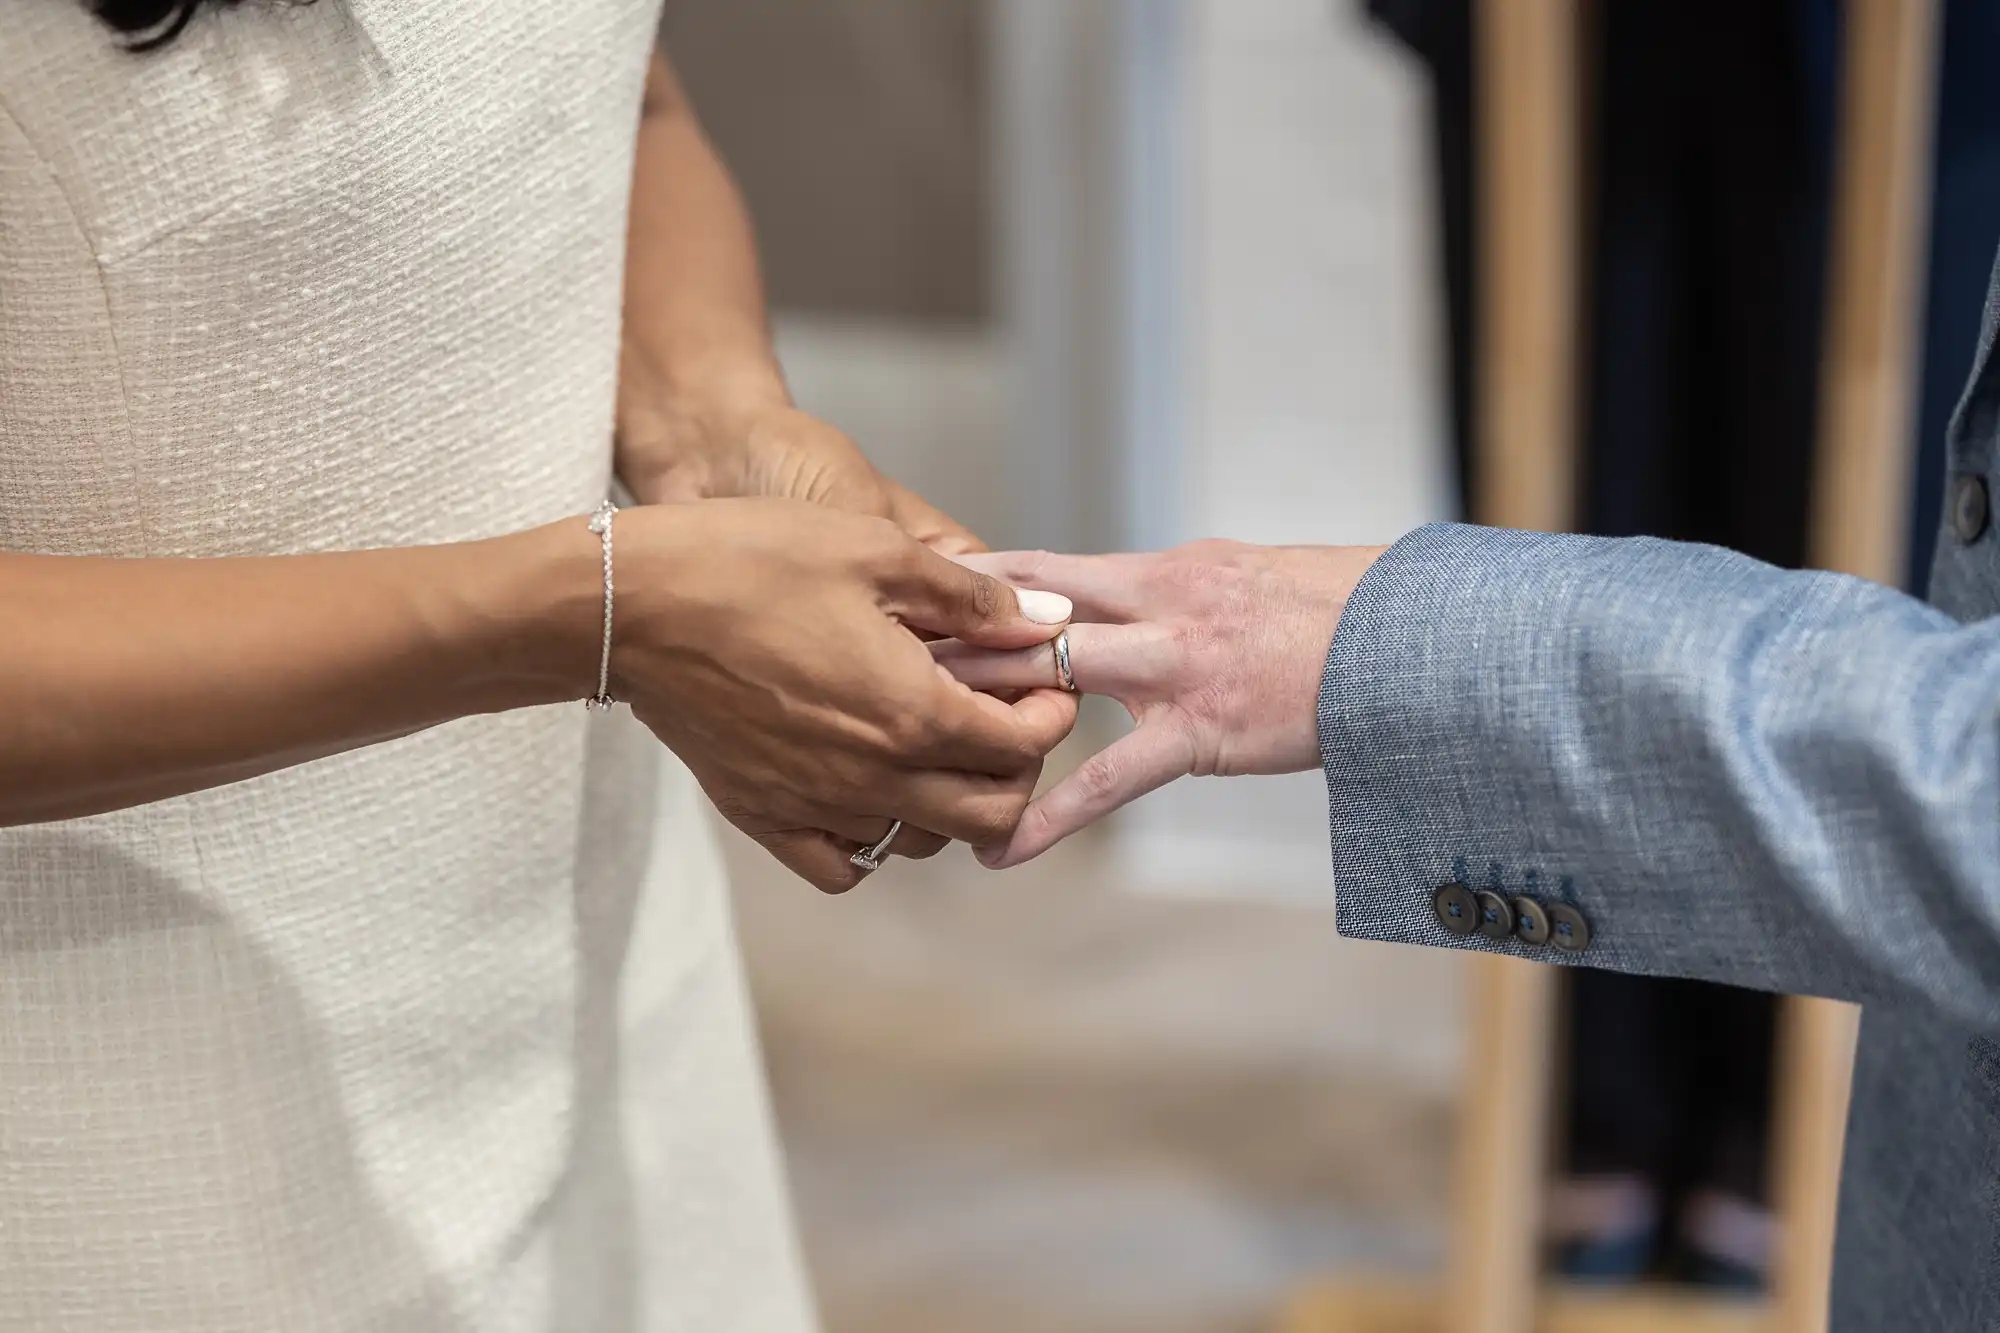 A person in a white dress places a ring on the finger of another person wearing a light blue suit jacket.